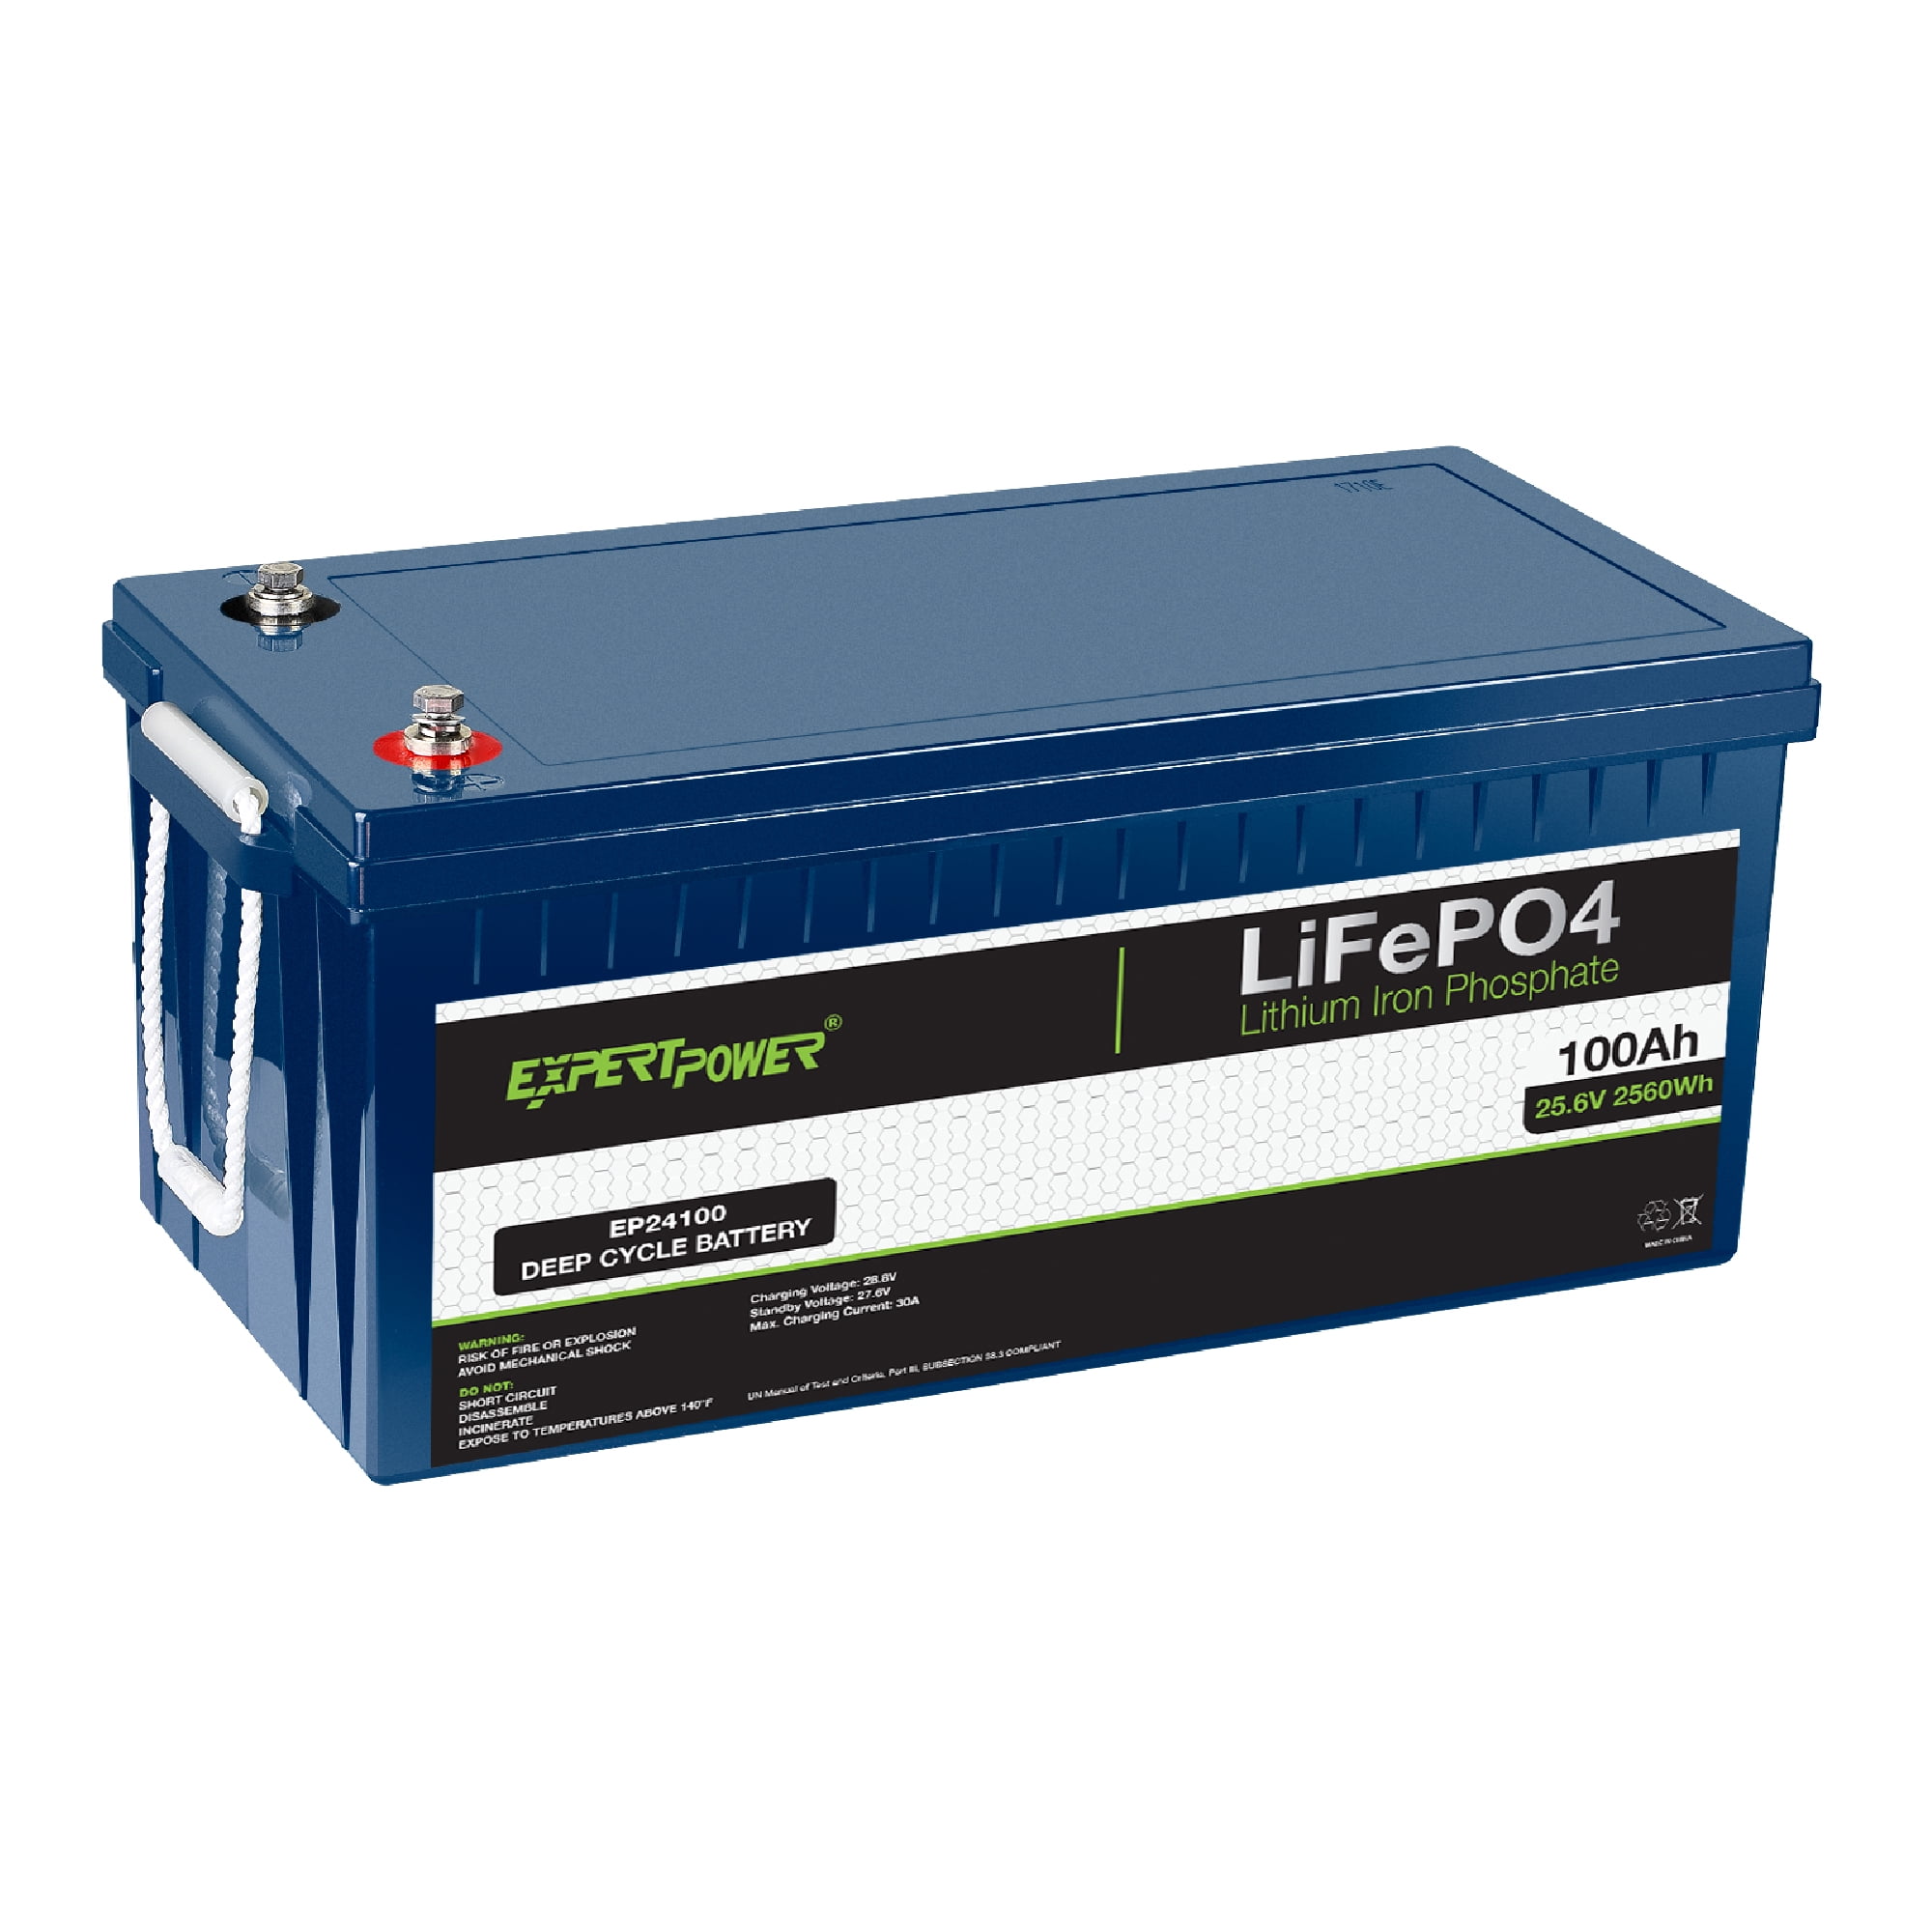 Buy Expertpower 24v 100ah Lithium Lifepo4 Deep Cycle Rechargeable